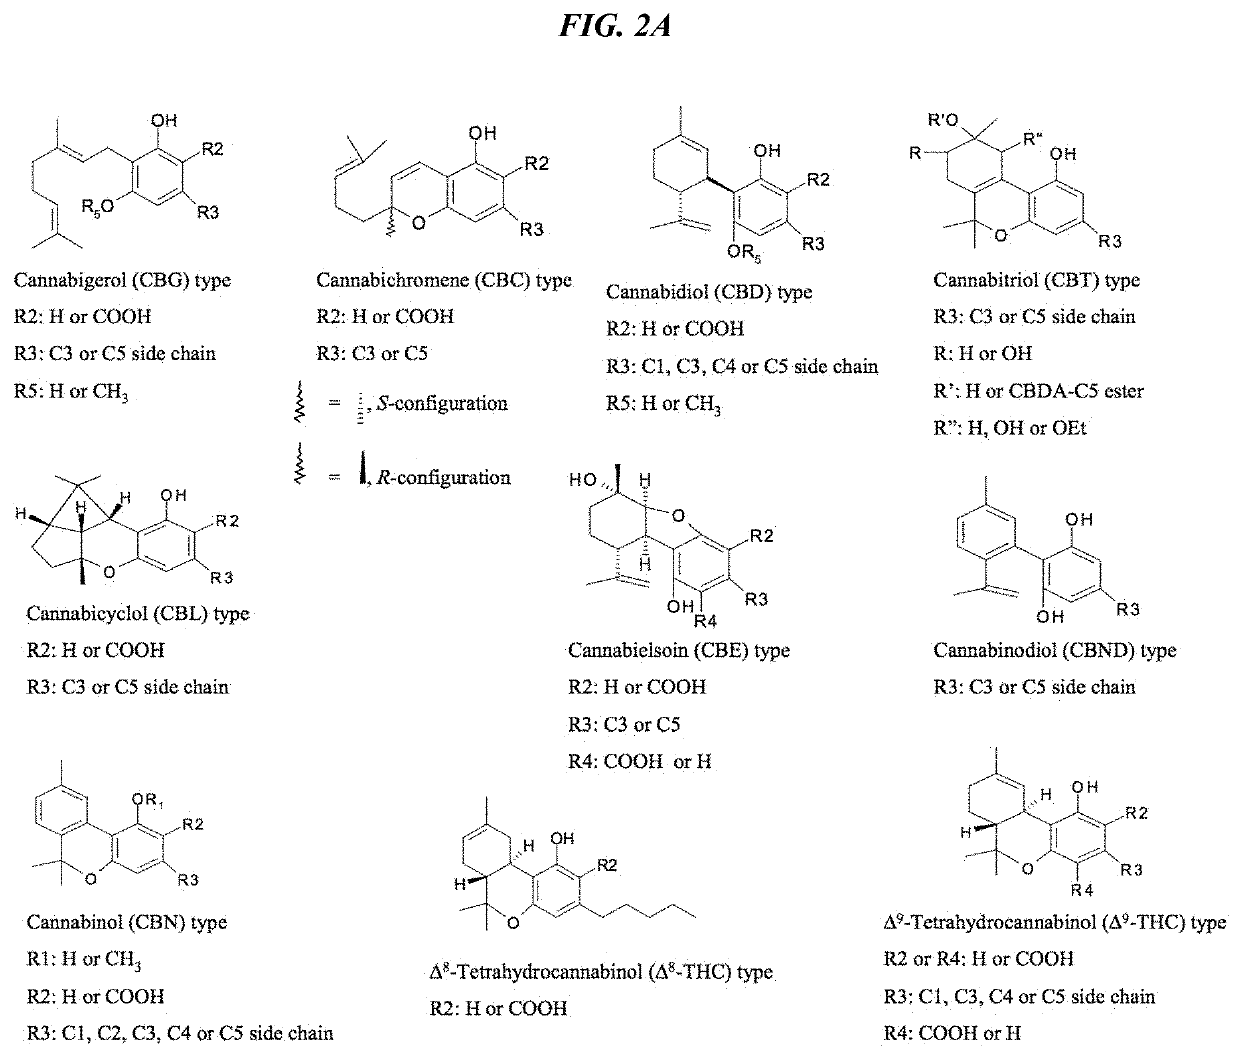 Recombinant production systems for prenylated polyketides of the cannabinoid family